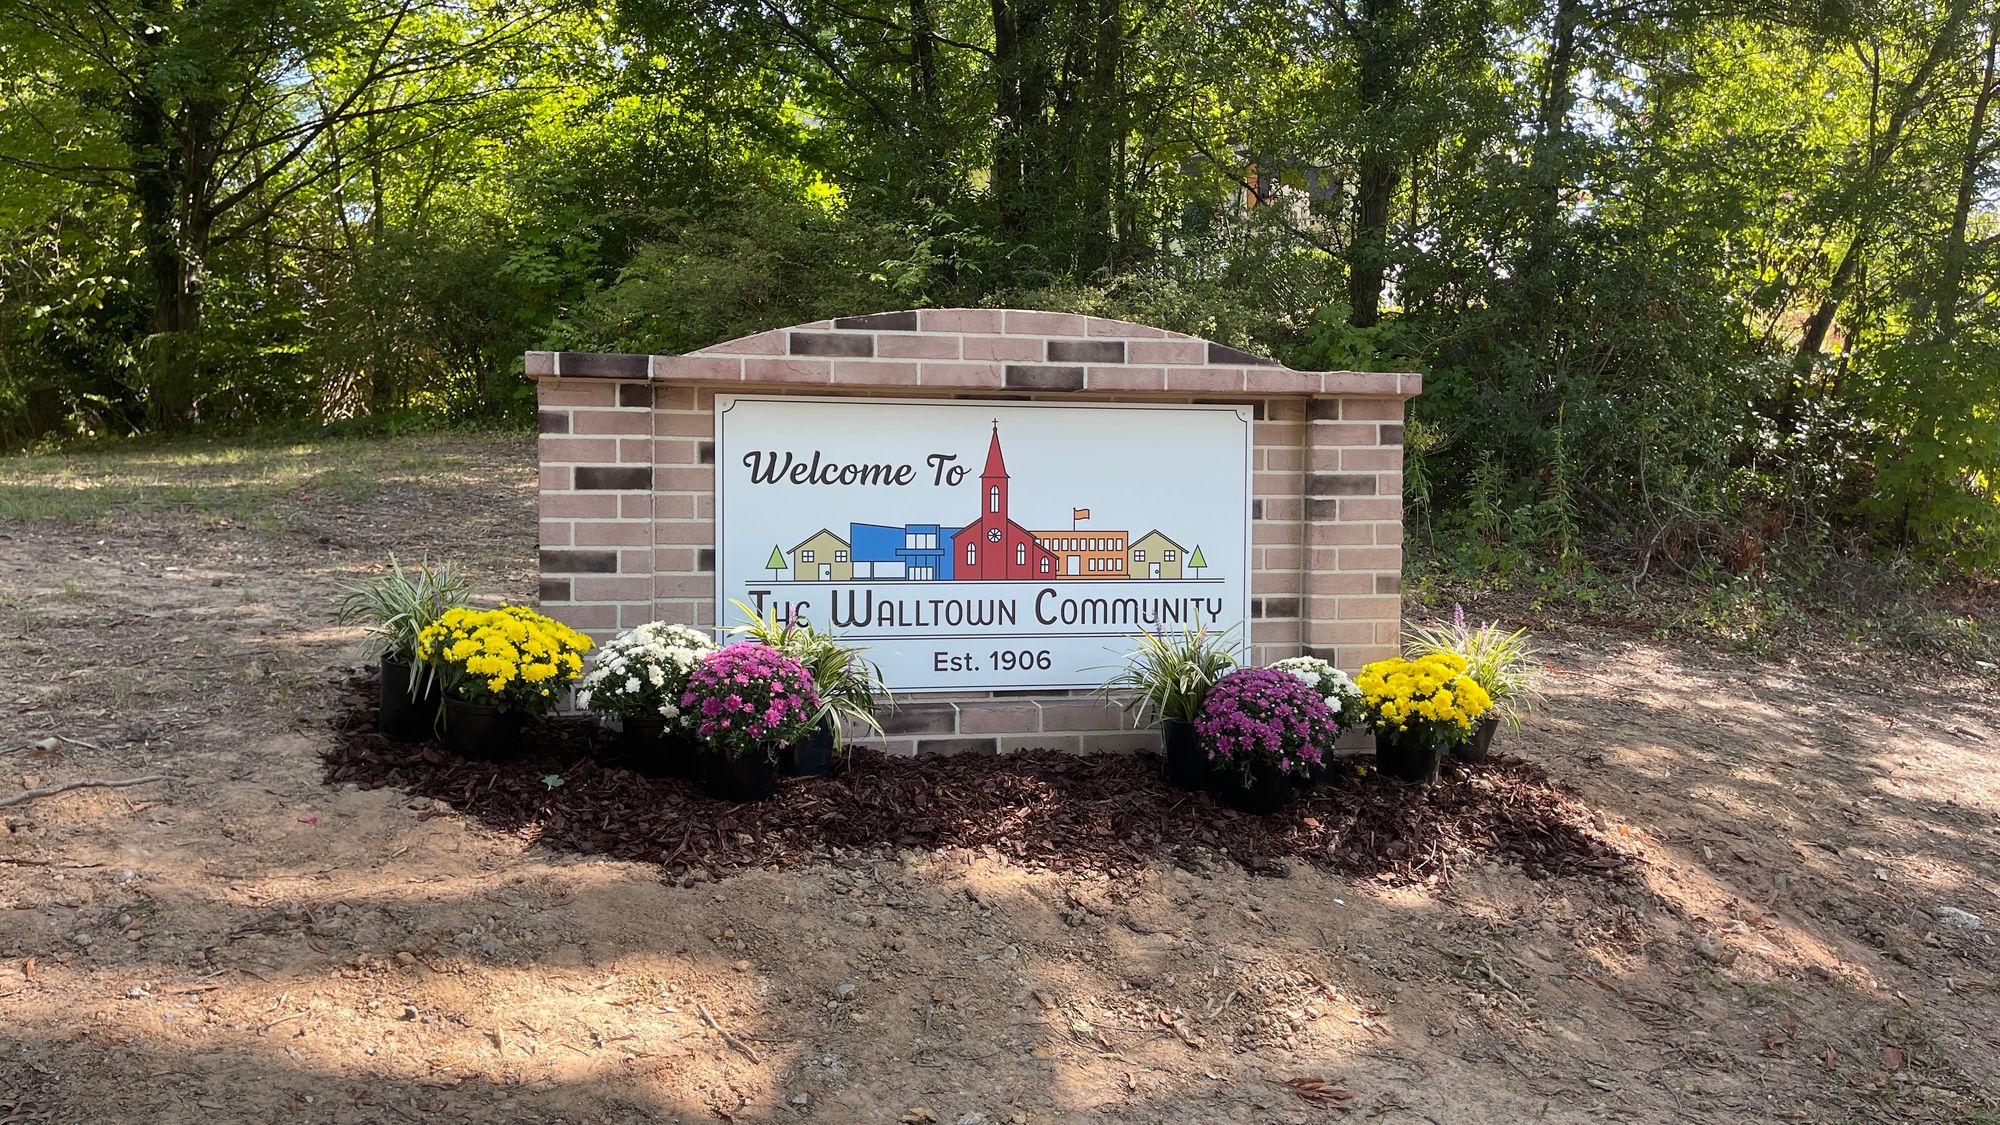 The Walltown community neighborhood sign located at the Walltown Recreational Center on W. Club Blvd.